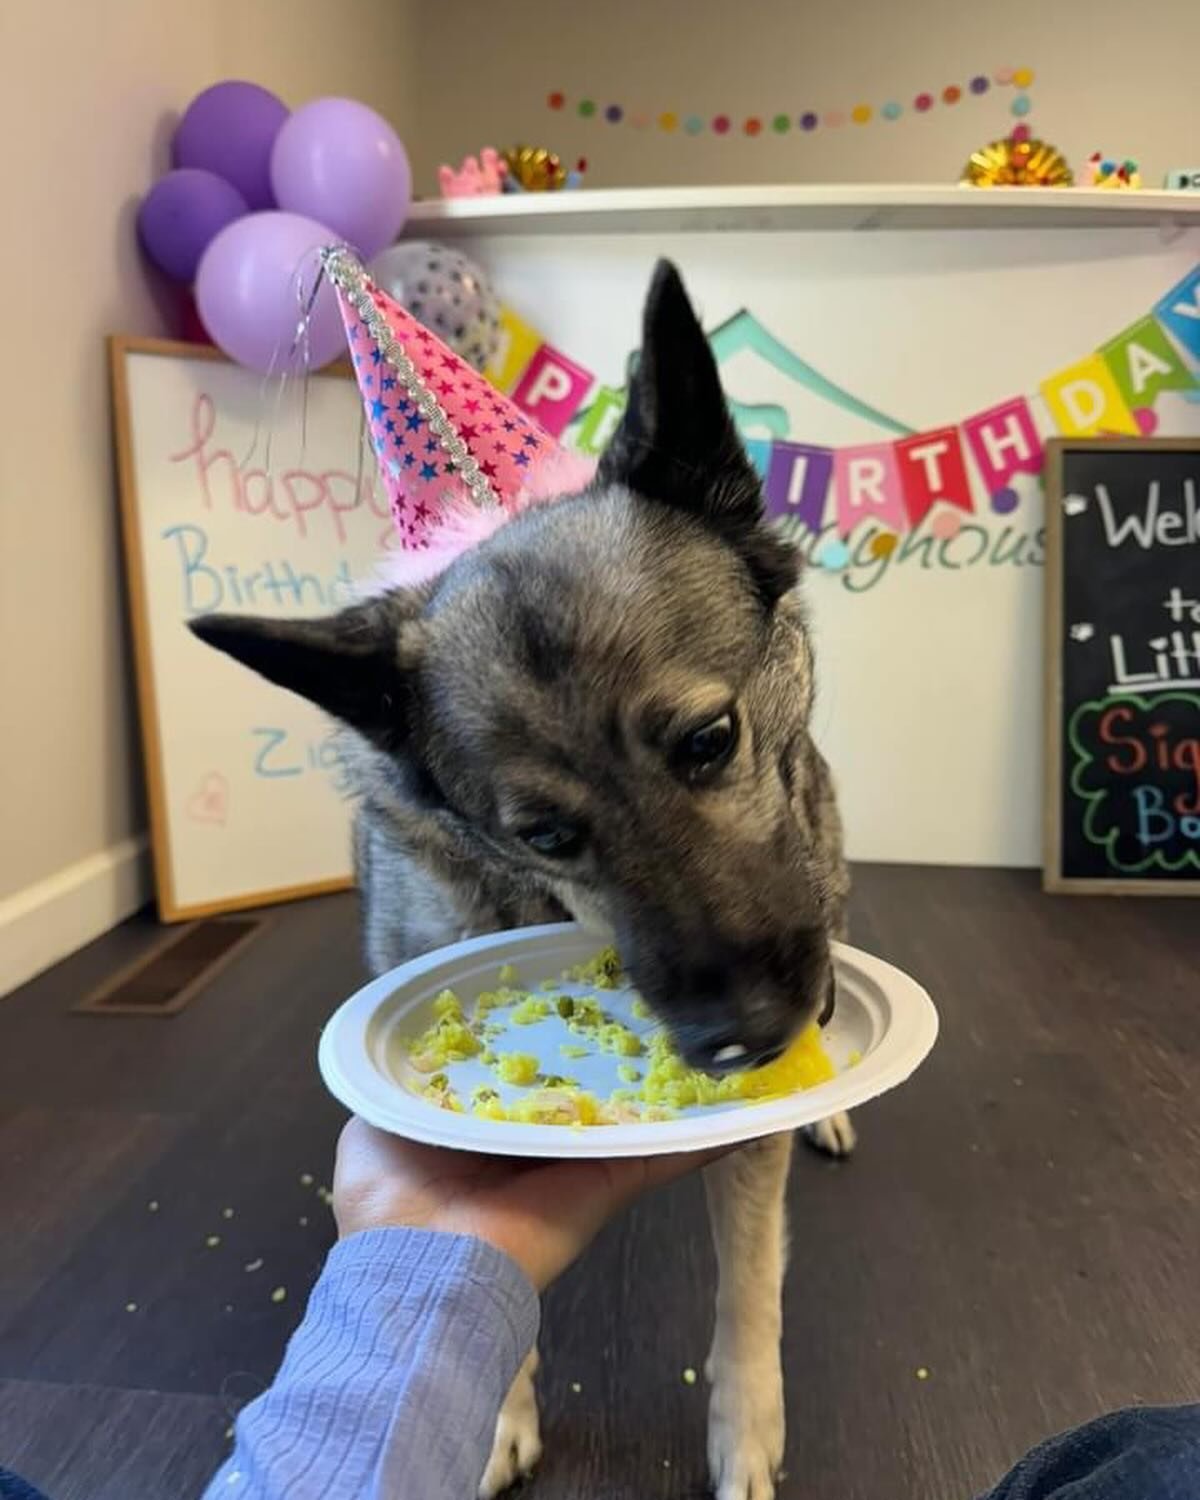 🥺 it&rsquo;s Lola&rsquo;s bday &amp; her daycare throws the doggos a birthday pawty and this is too cute. They have &ldquo;cake&rdquo; and get to play with their friends and it&rsquo;s free!!! I may have teared up a little but won&rsquo;t confirm. H